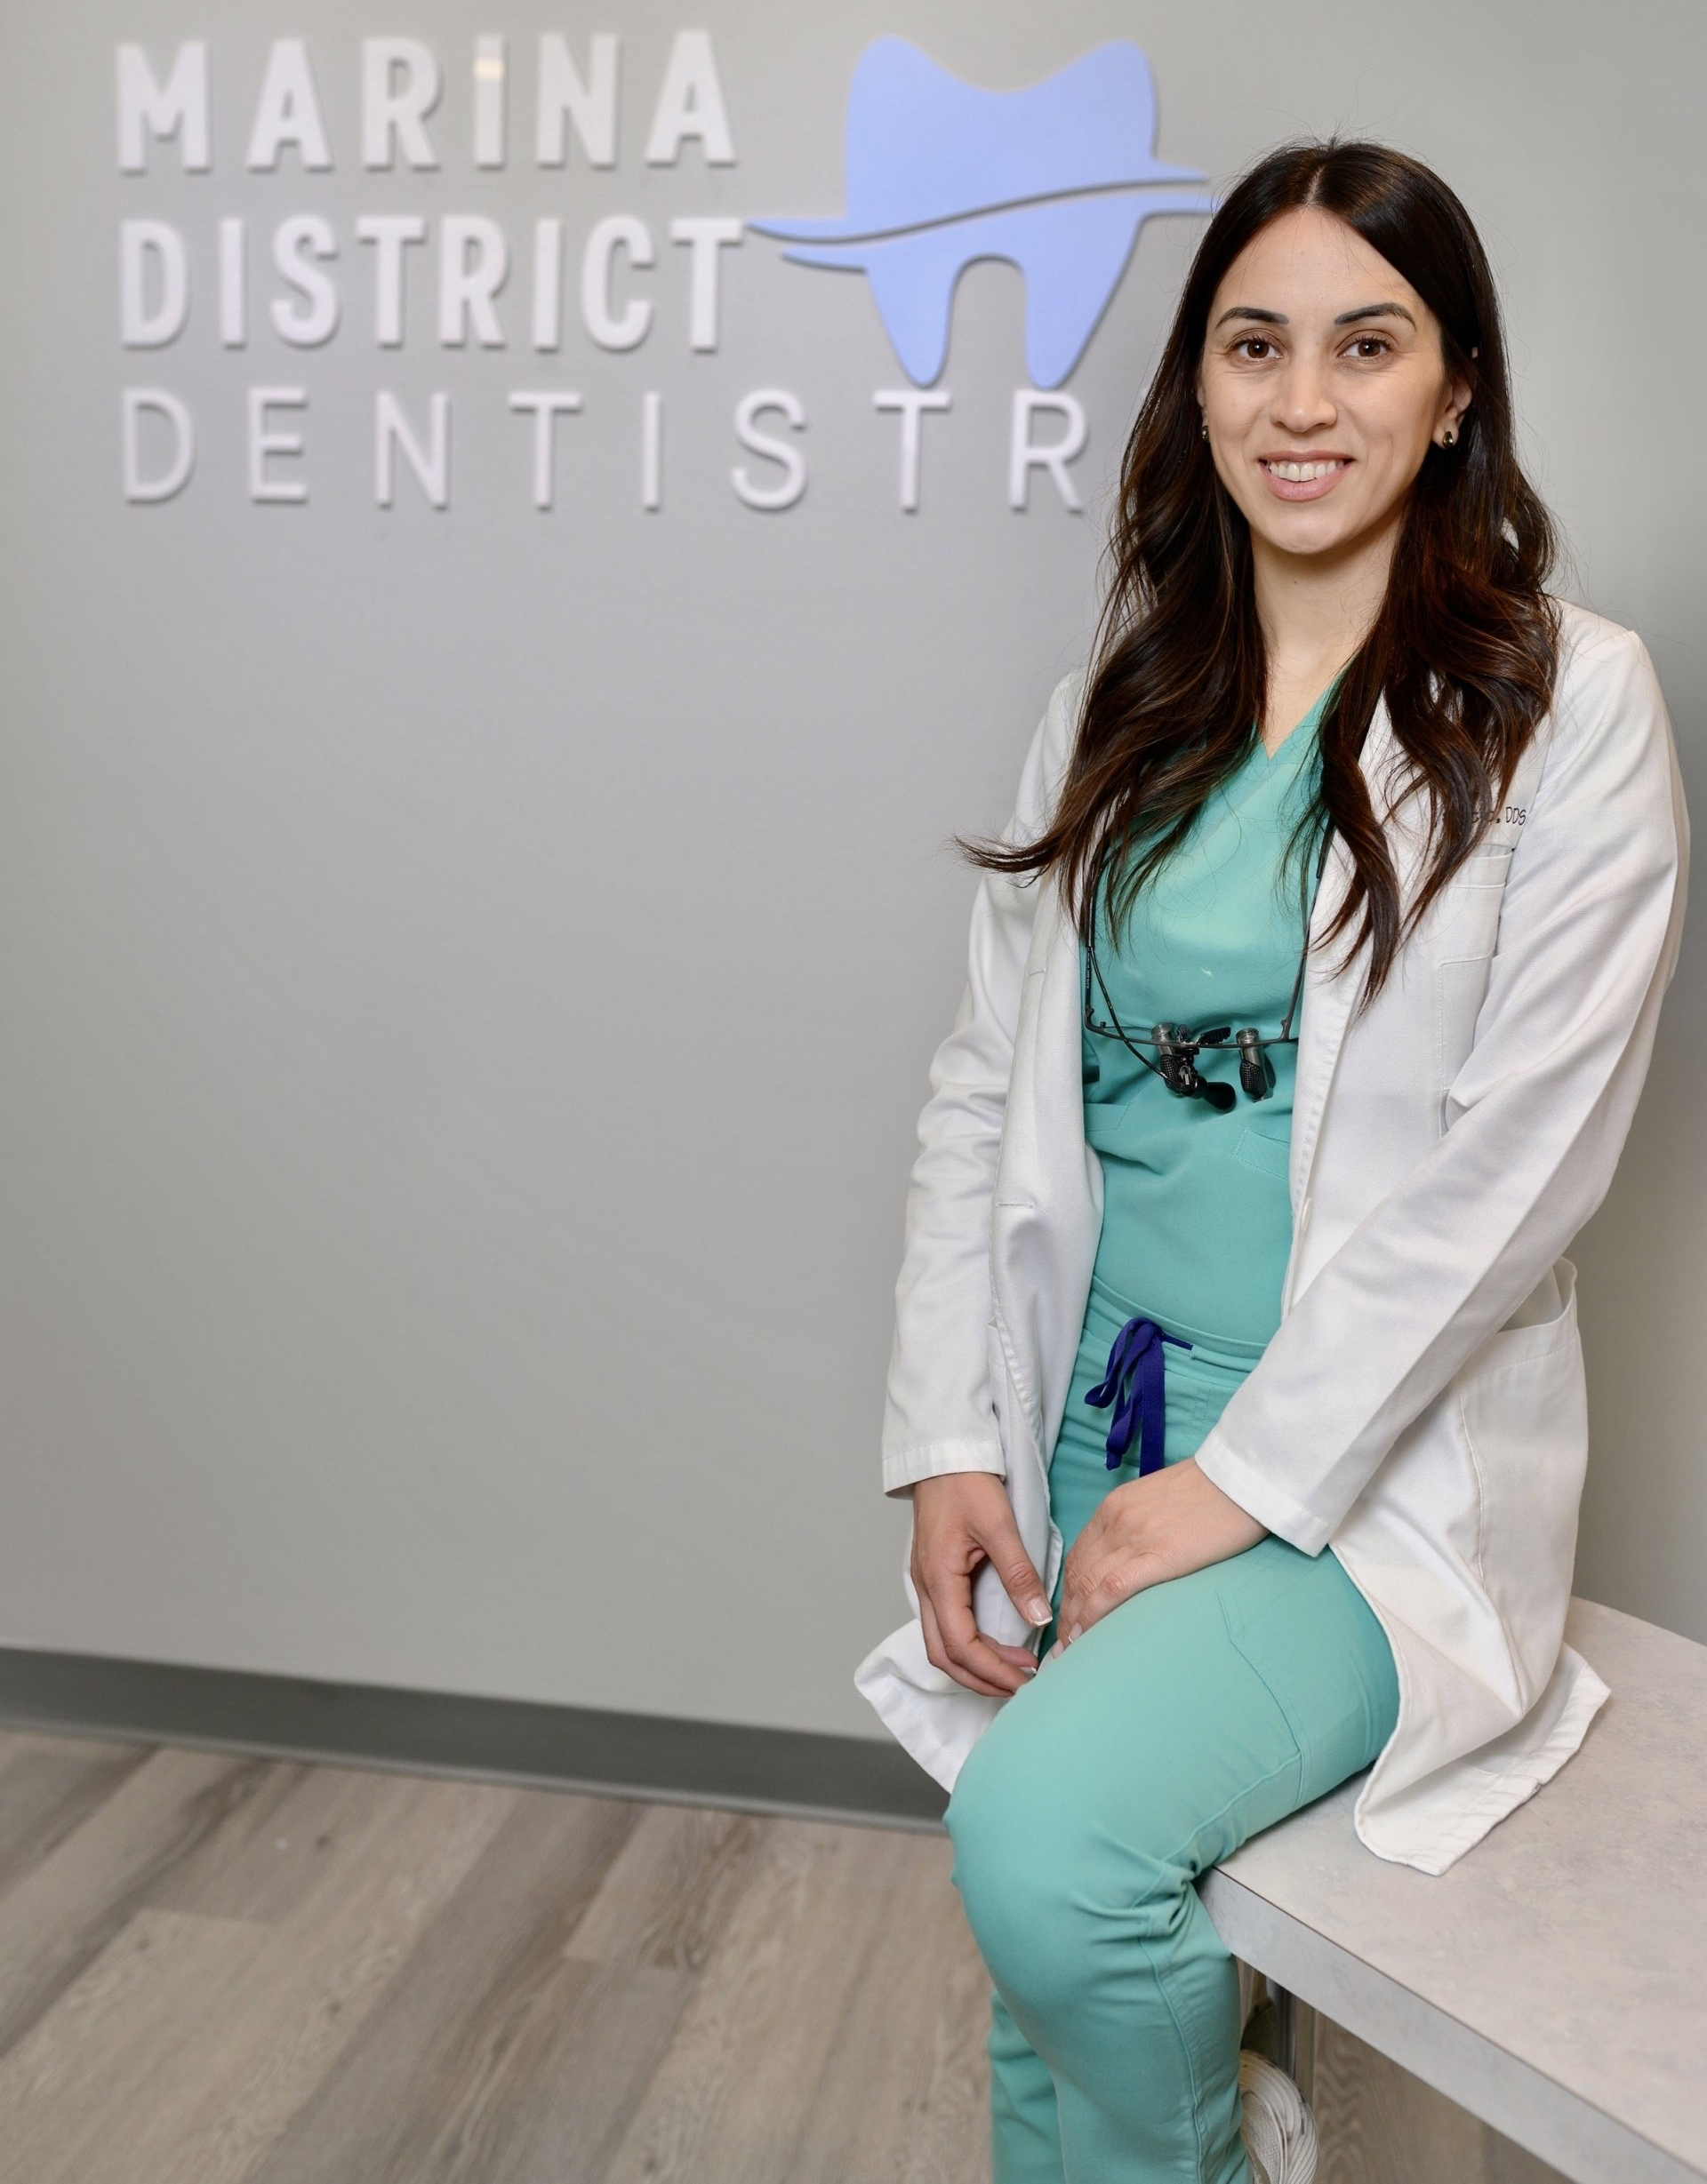 Dr. Racic loves being a best cosmetic dentist in San Diego